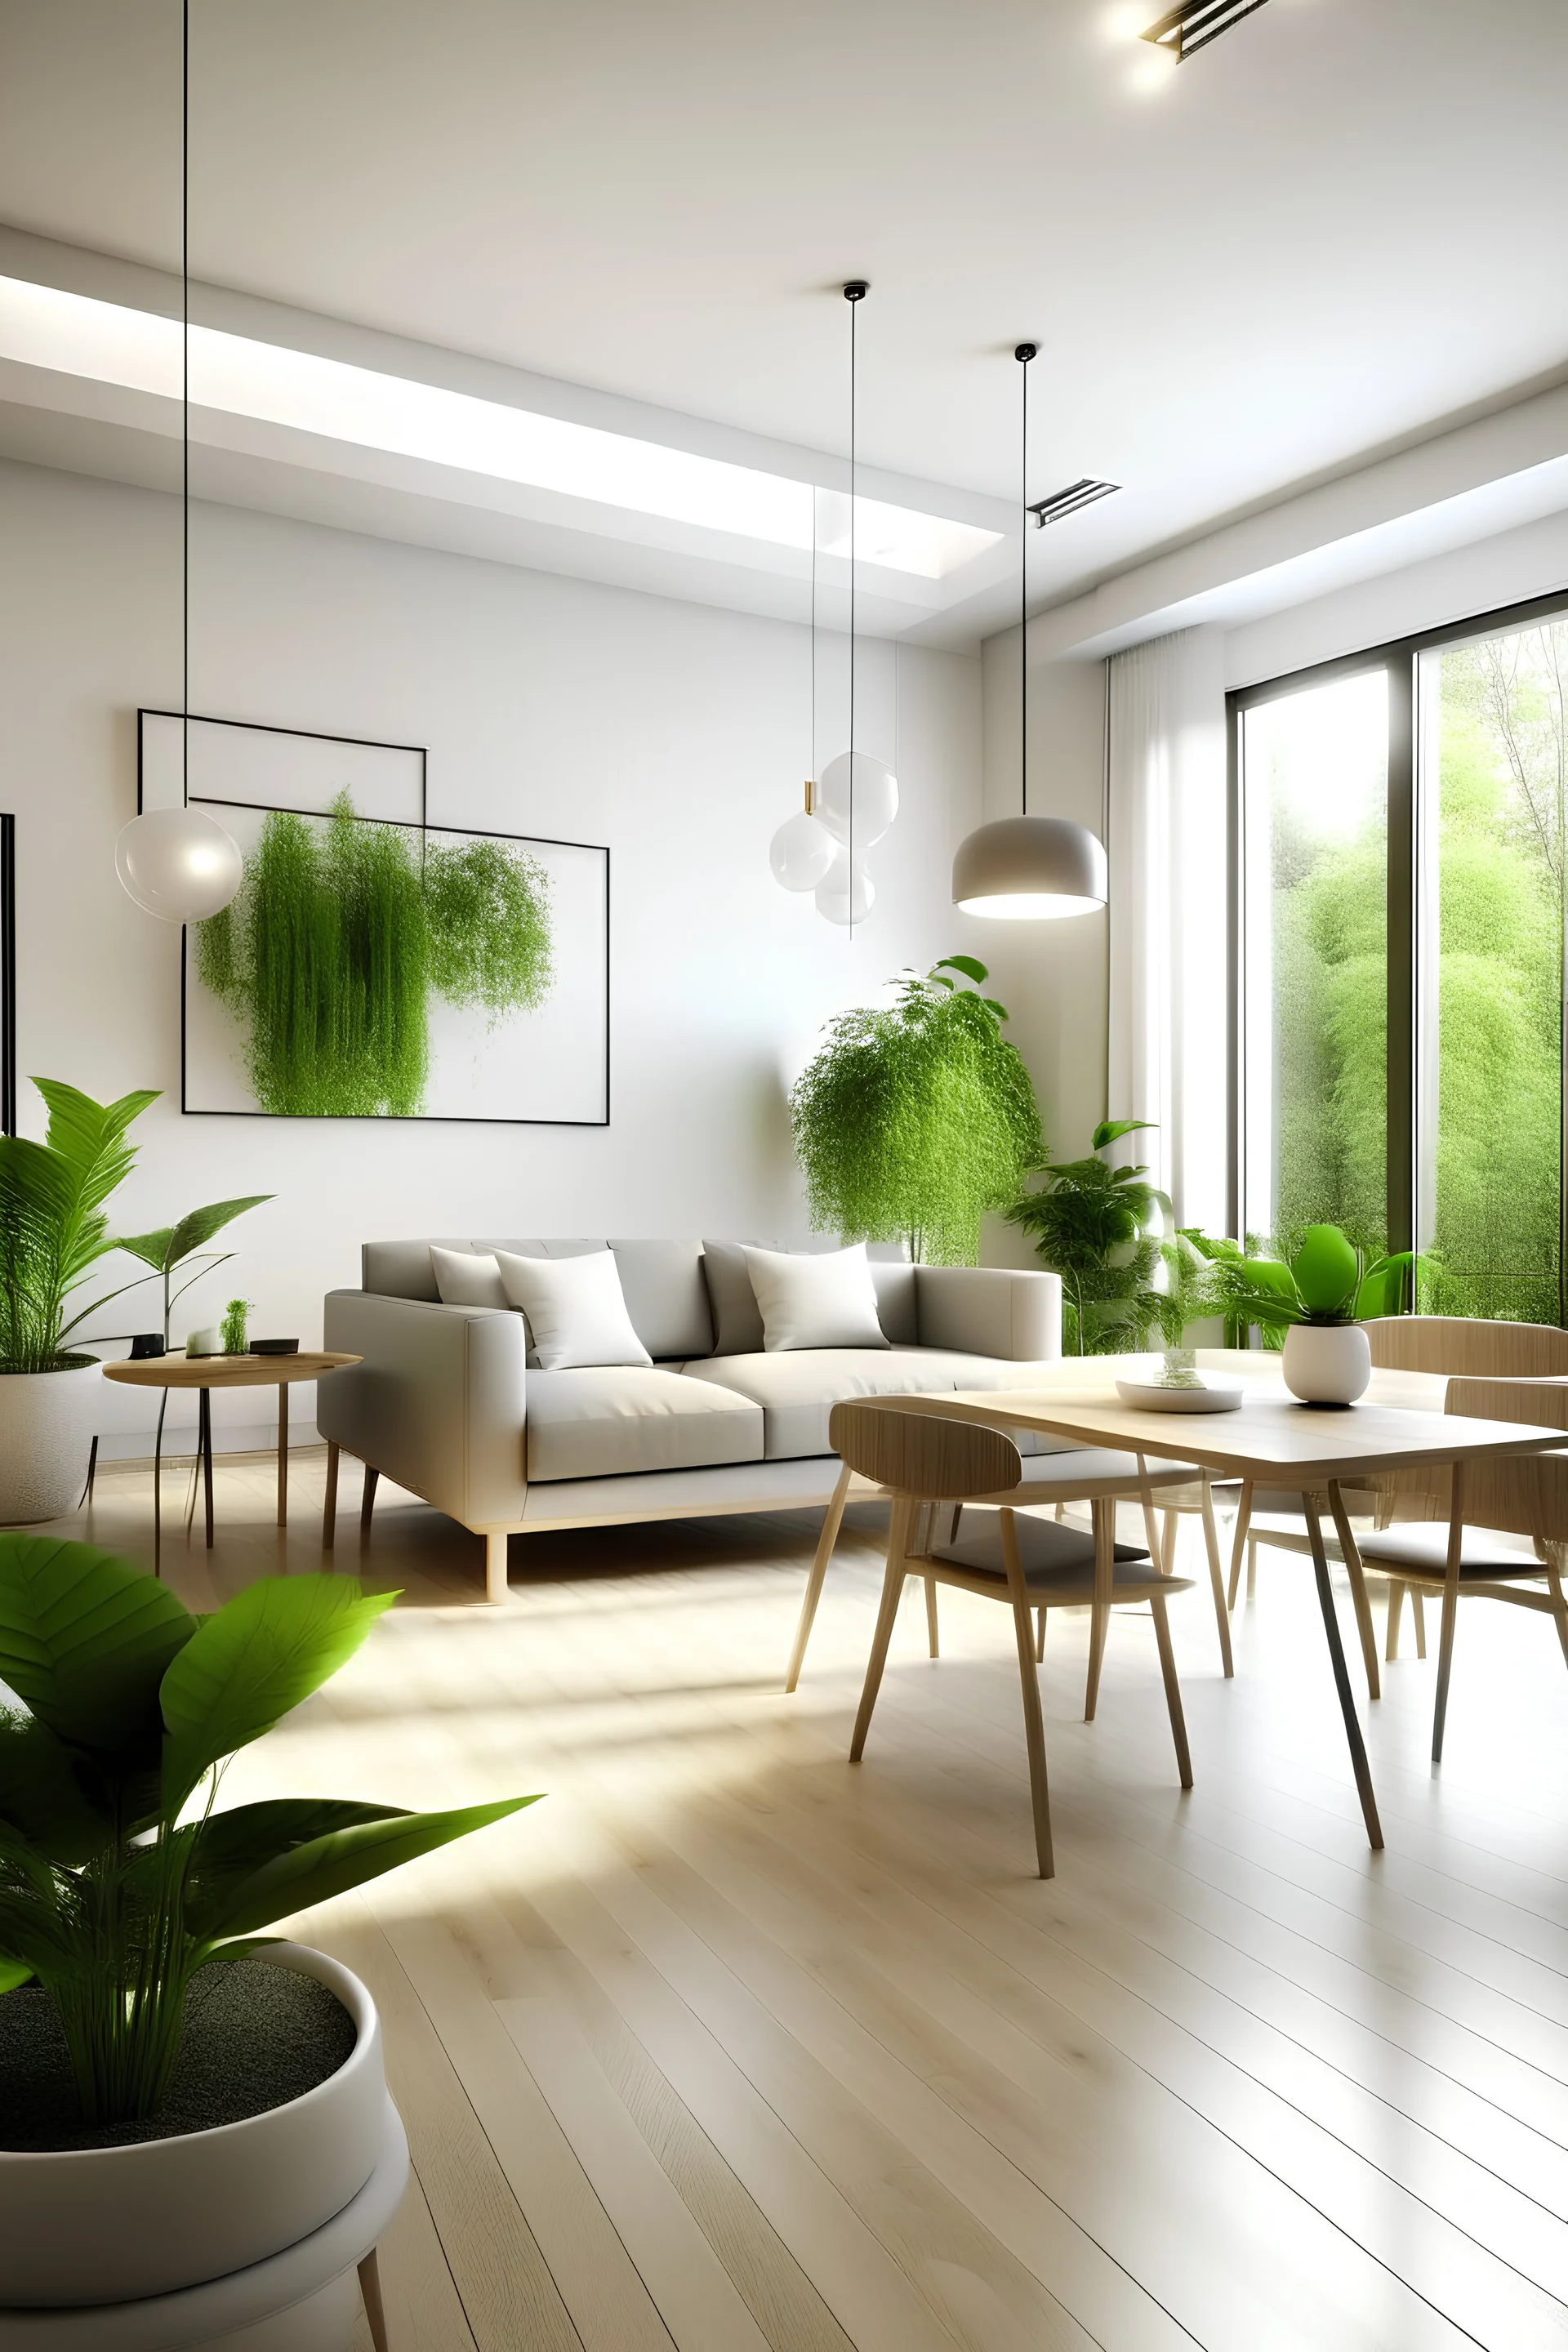 Generate a modern living room and dinning room, with plants, windows and space